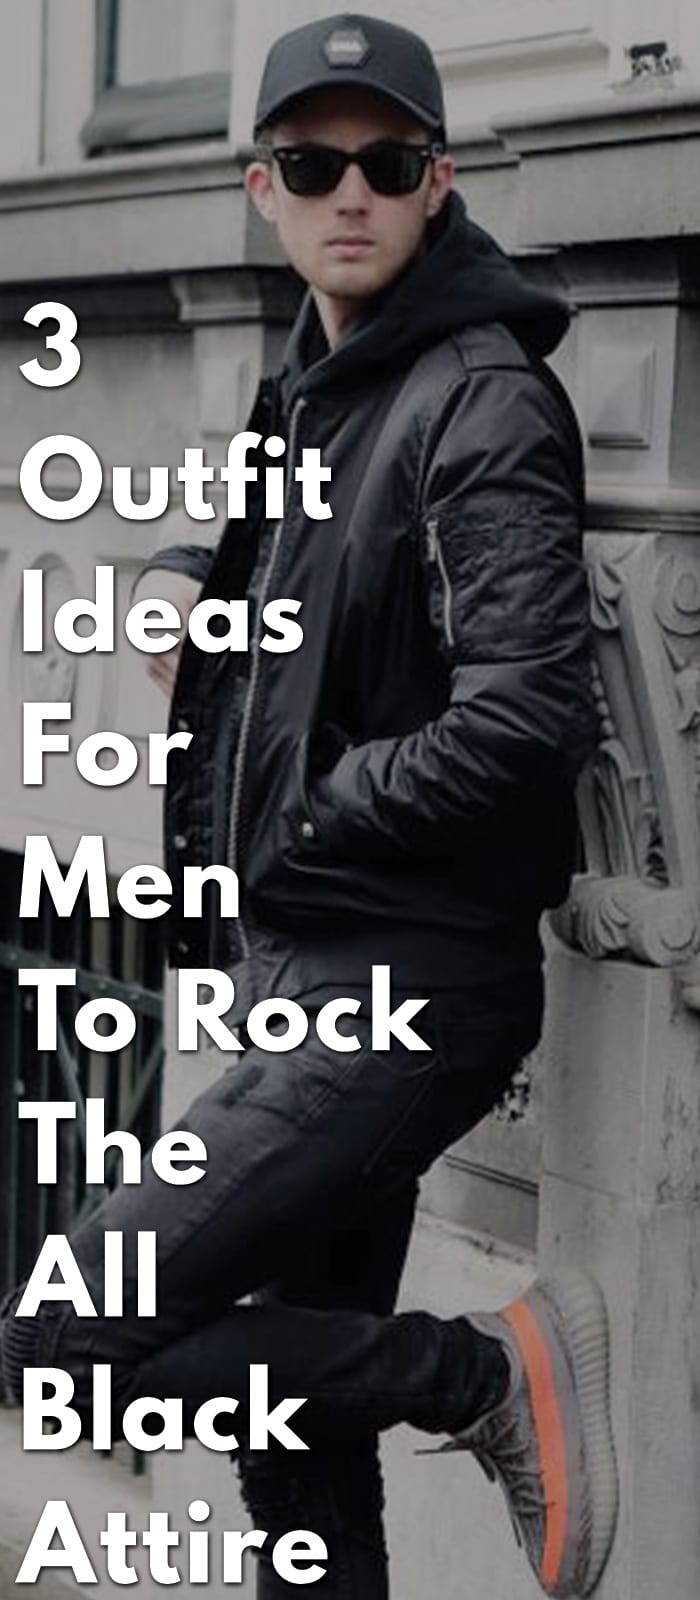 3-Outfit-Ideas-For-Men-To-Rock-The-All-Black-Attire